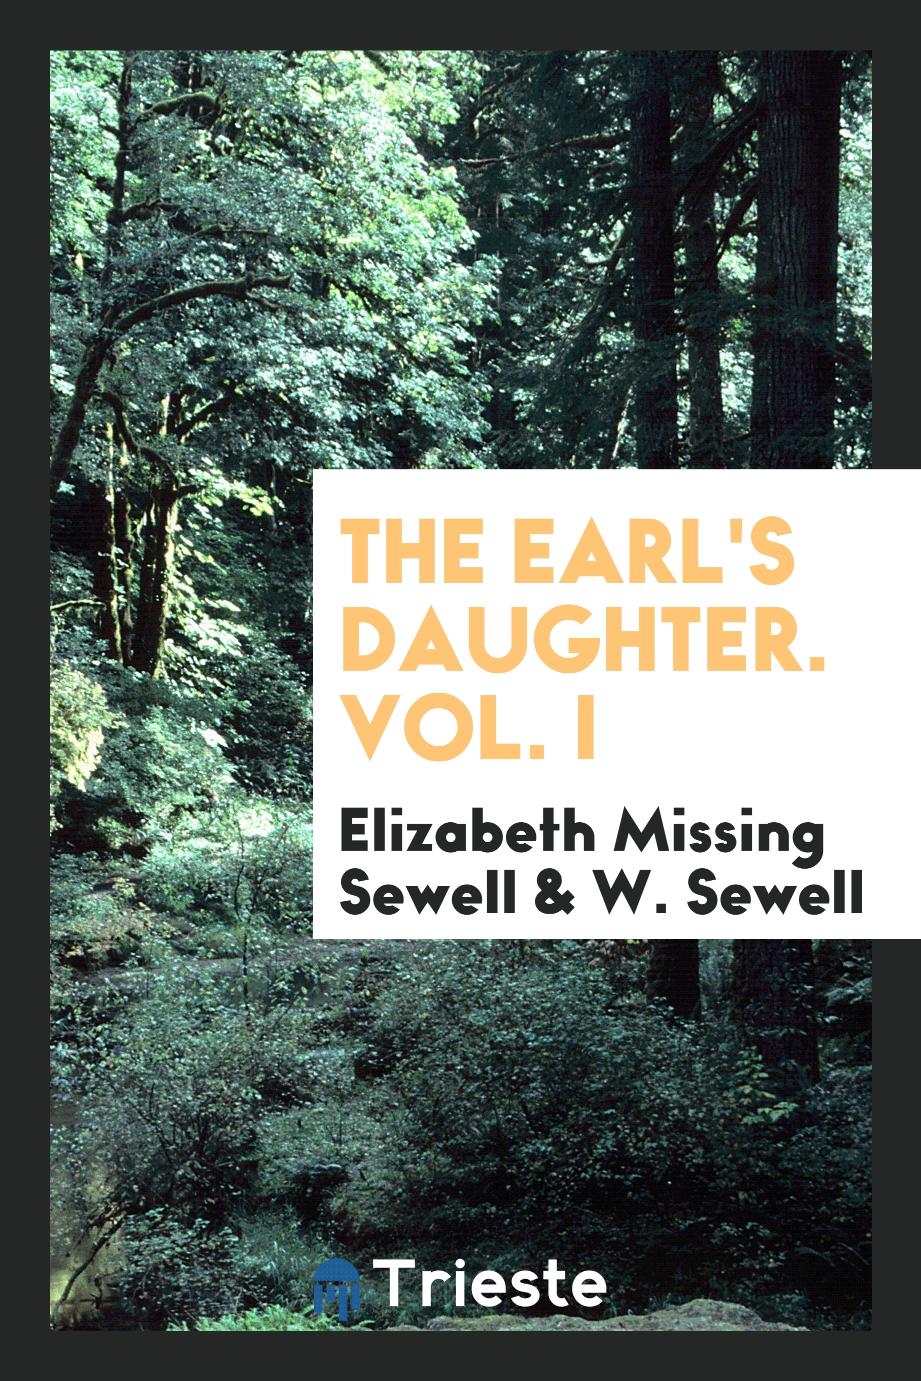 The Earl's Daughter. Vol. I